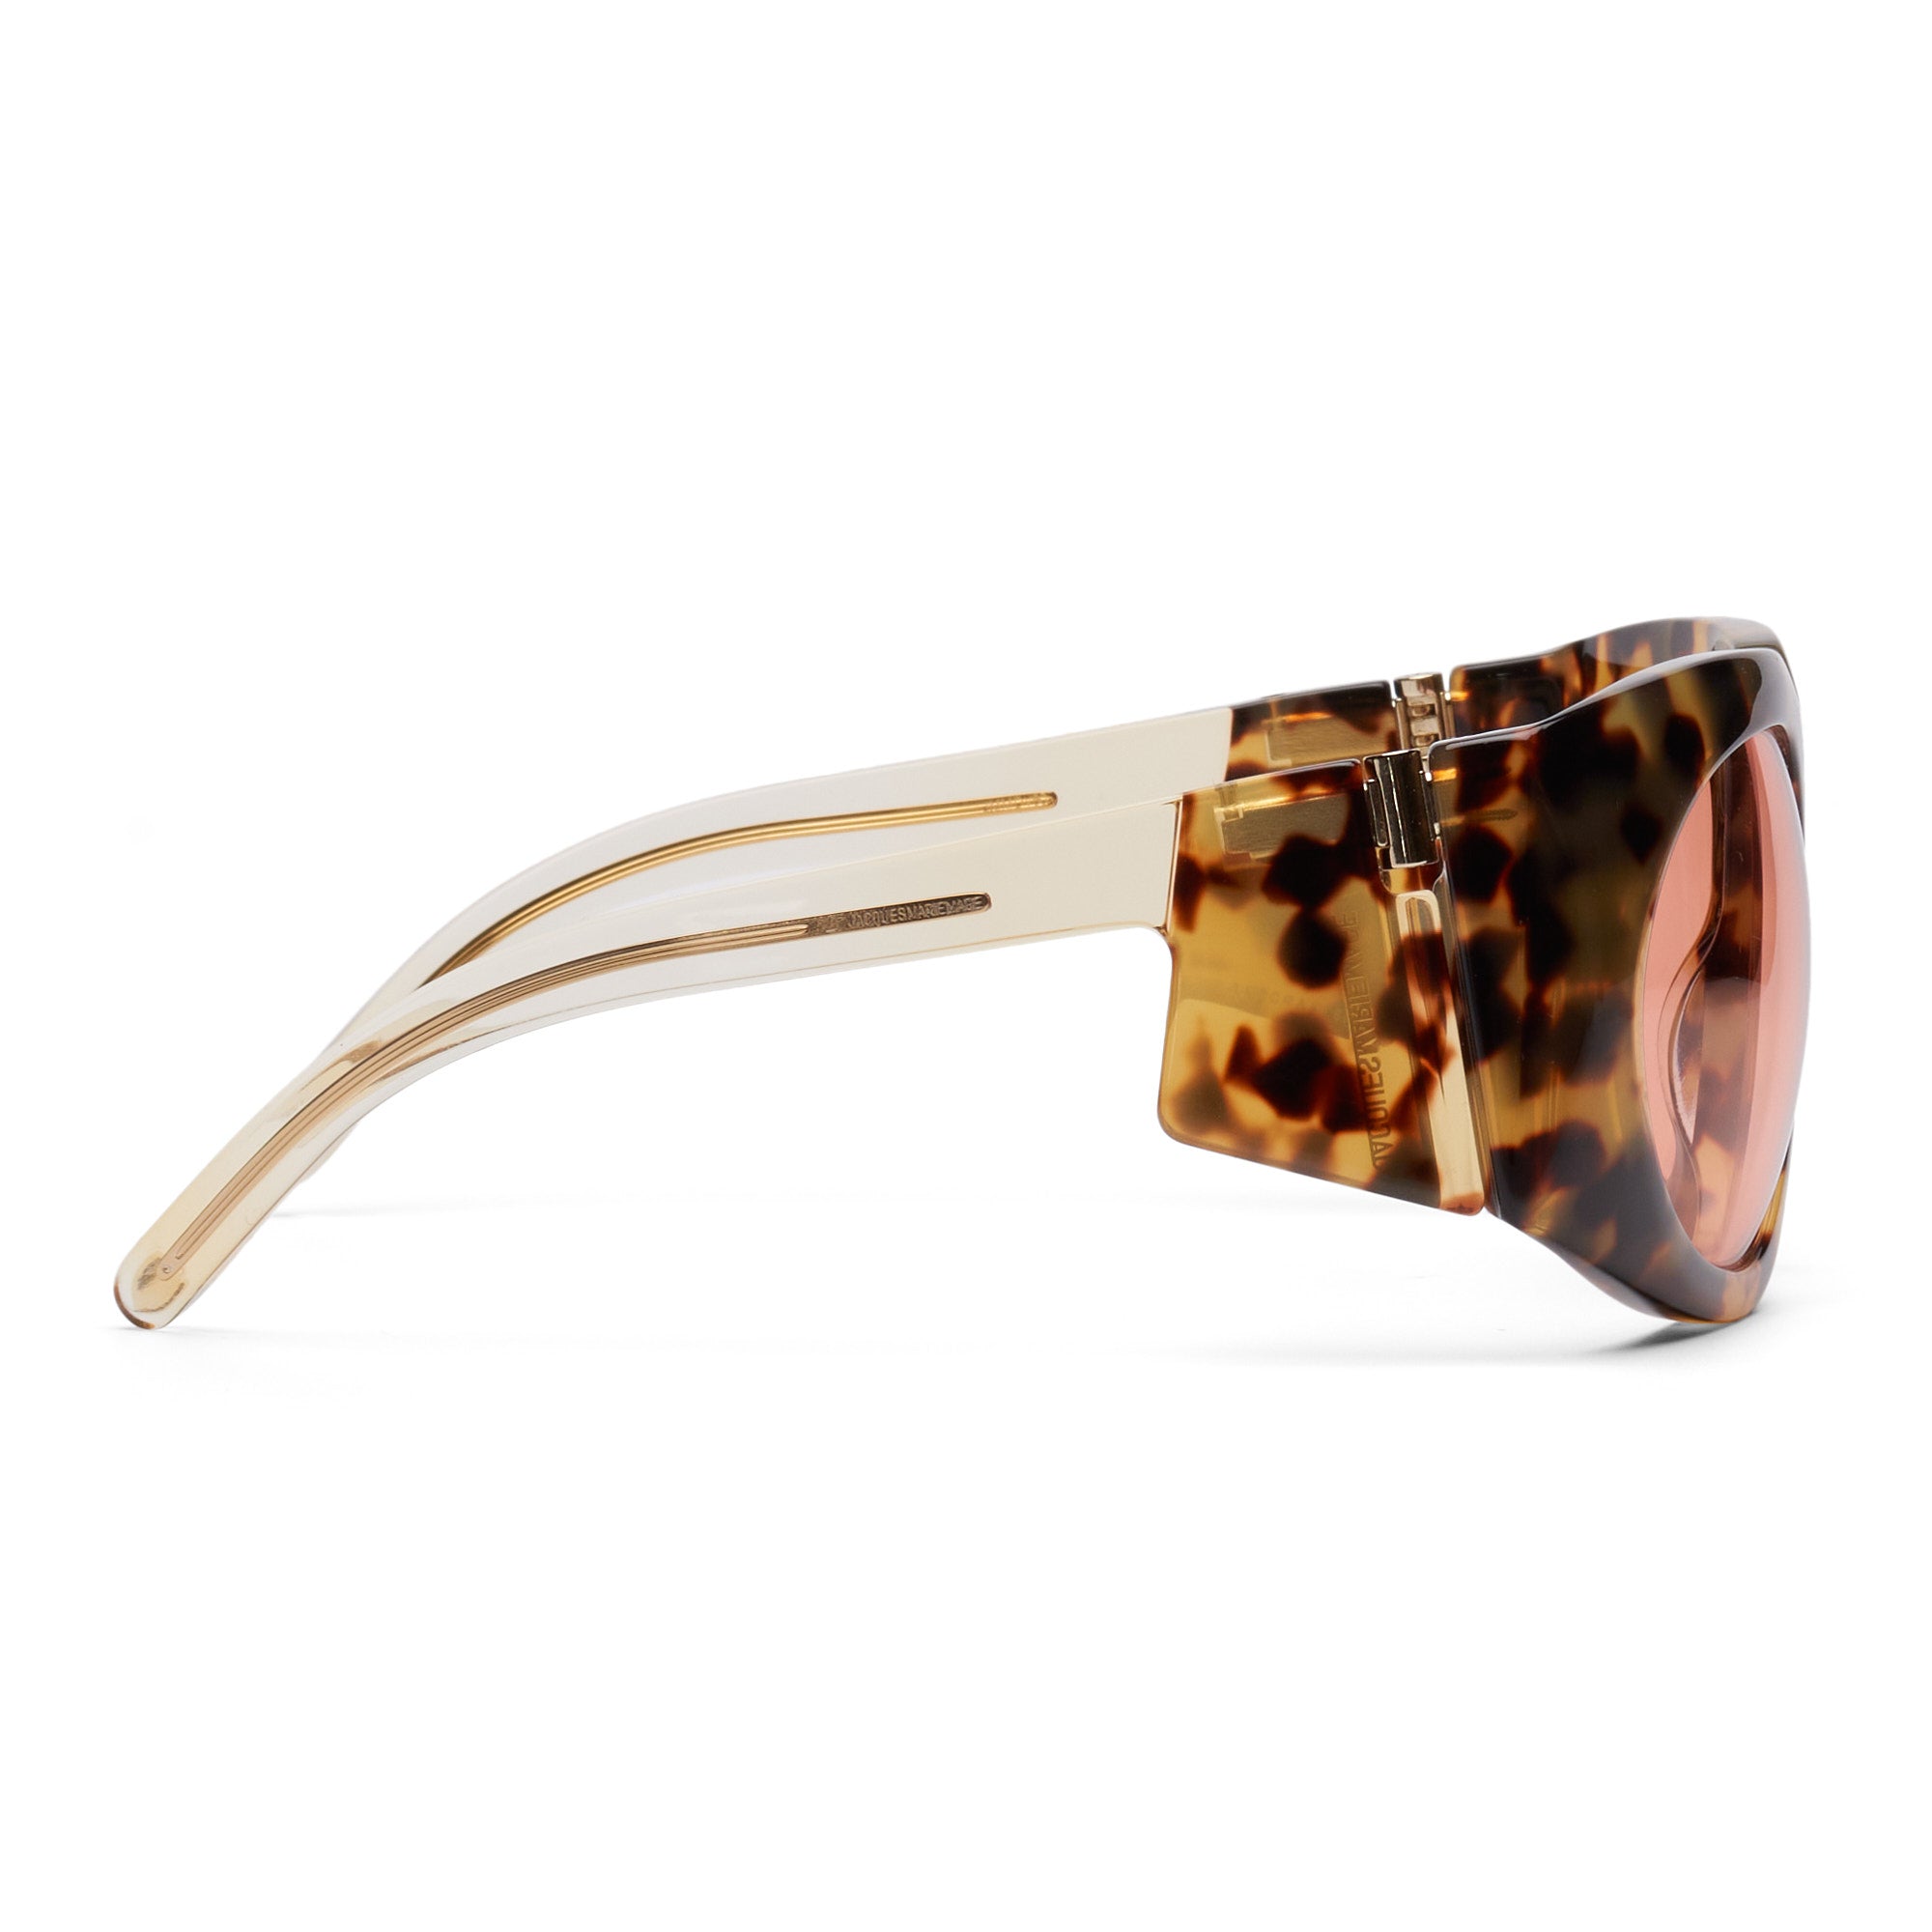 JACQUES MARIE MAGE "Duval" JMMDV-90 Limited Edition 25/100 Sunglasses NEW JACQUES MARIE MAGE